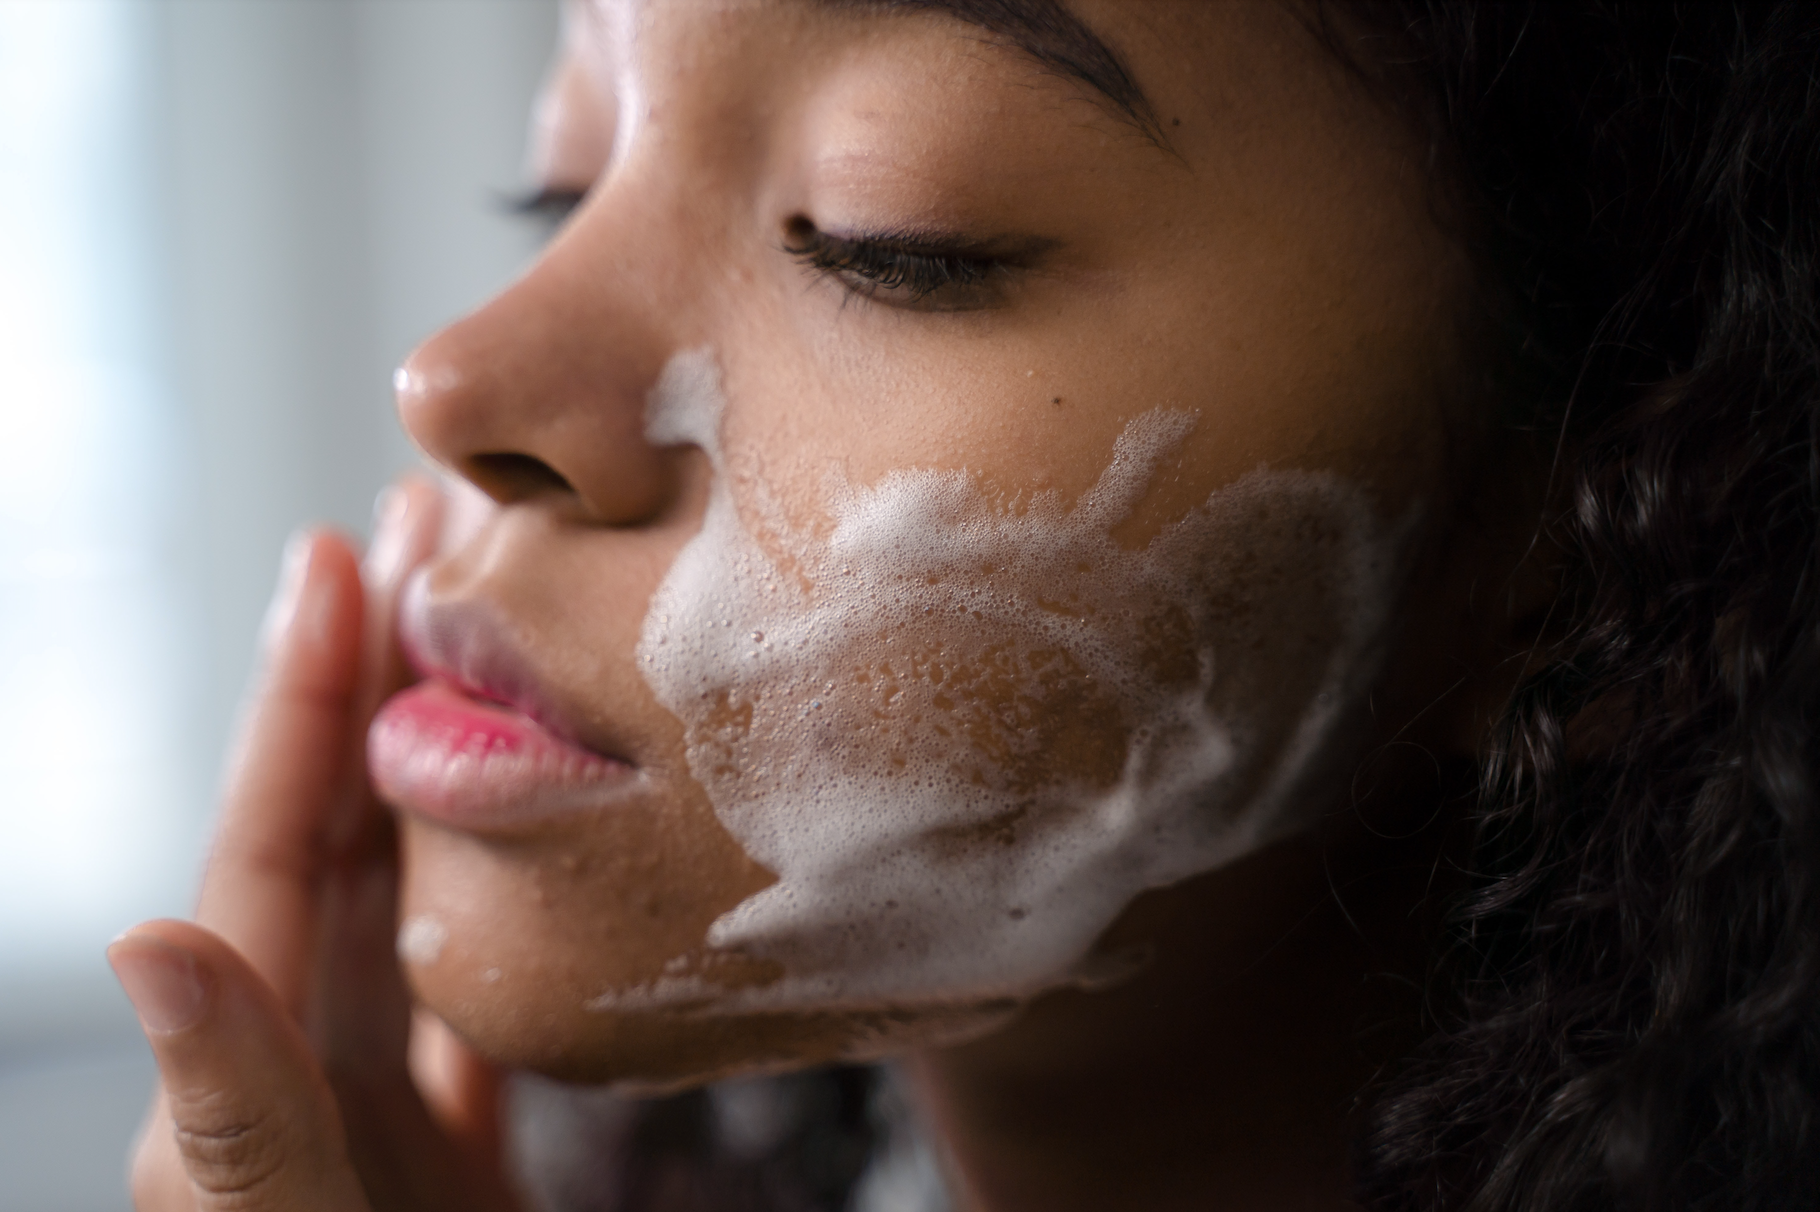 How to Double-Cleanse According to Your Skin Type